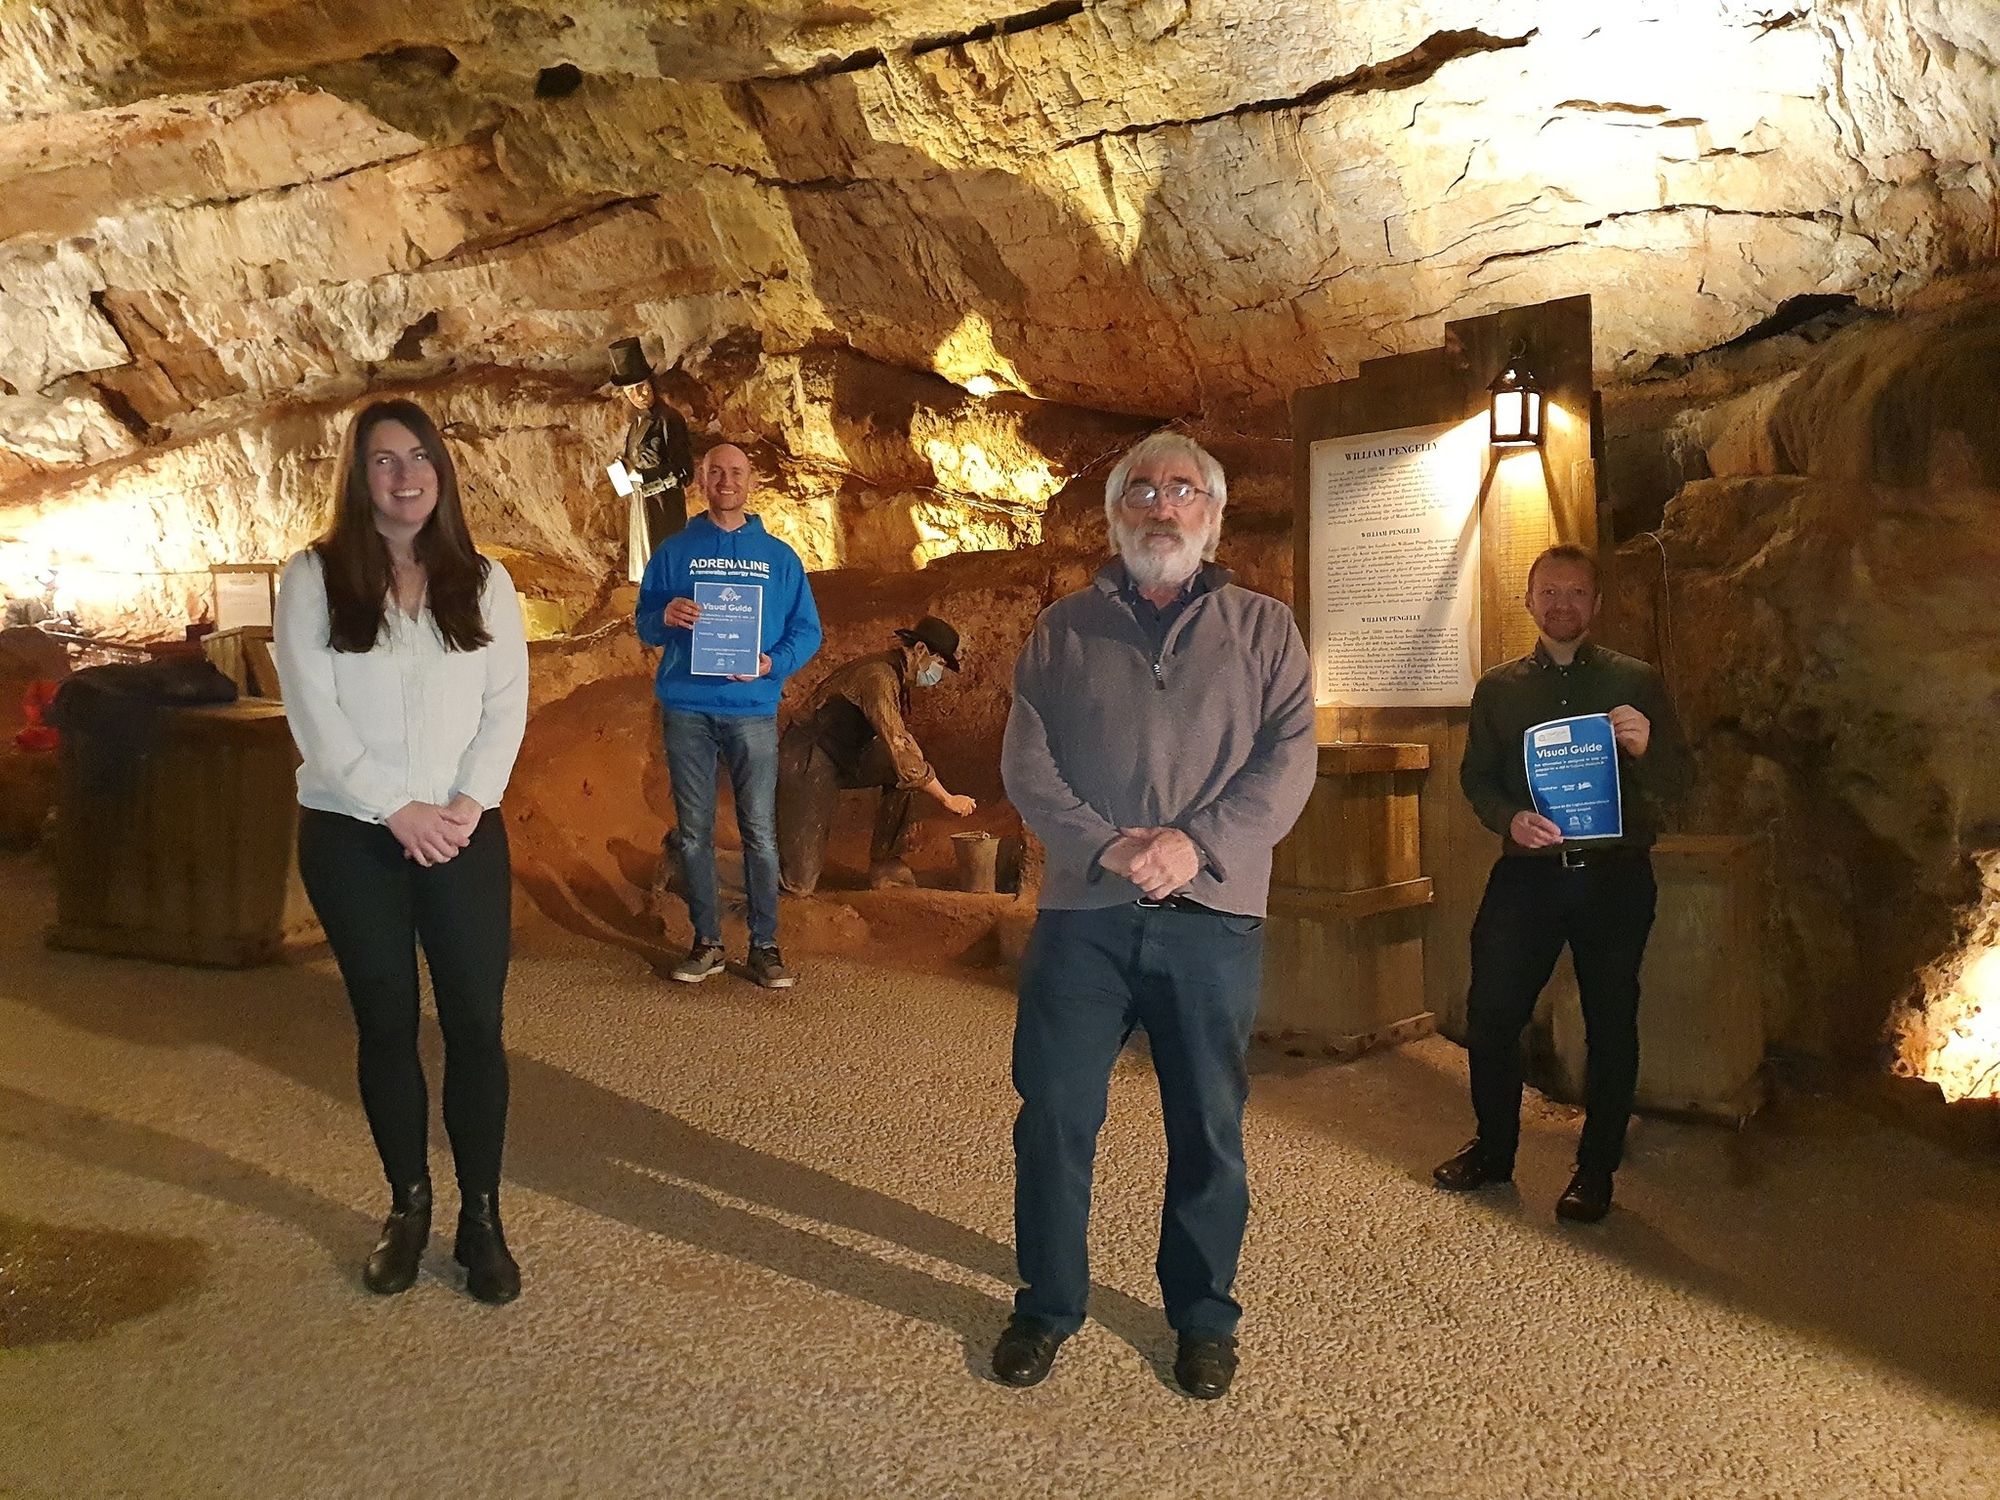 To help your visit, the Geopark has created a number of Visual Guides that will provide you with all the information you need in advance of visiting.